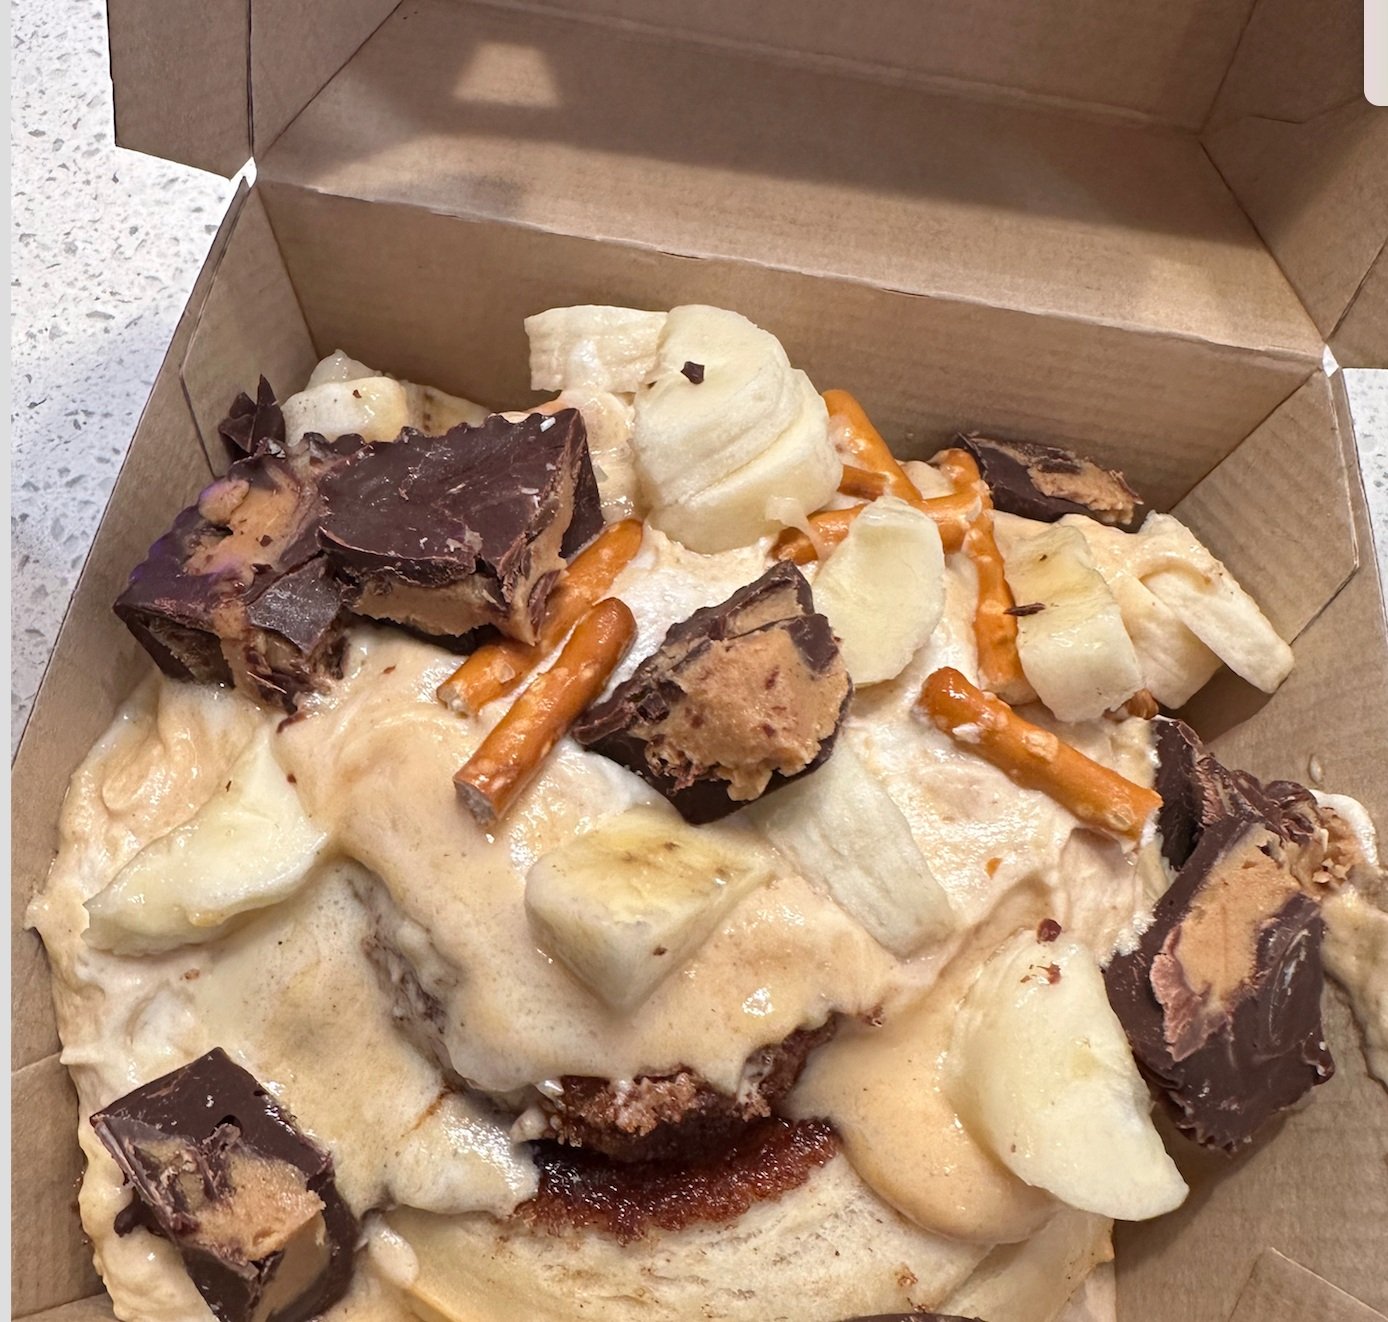  Shake Rattle and Roll -    Peanut butter frosting topped with homemade peanut butter cups, fresh bananas and pretzels.   Gifted to a friend.  